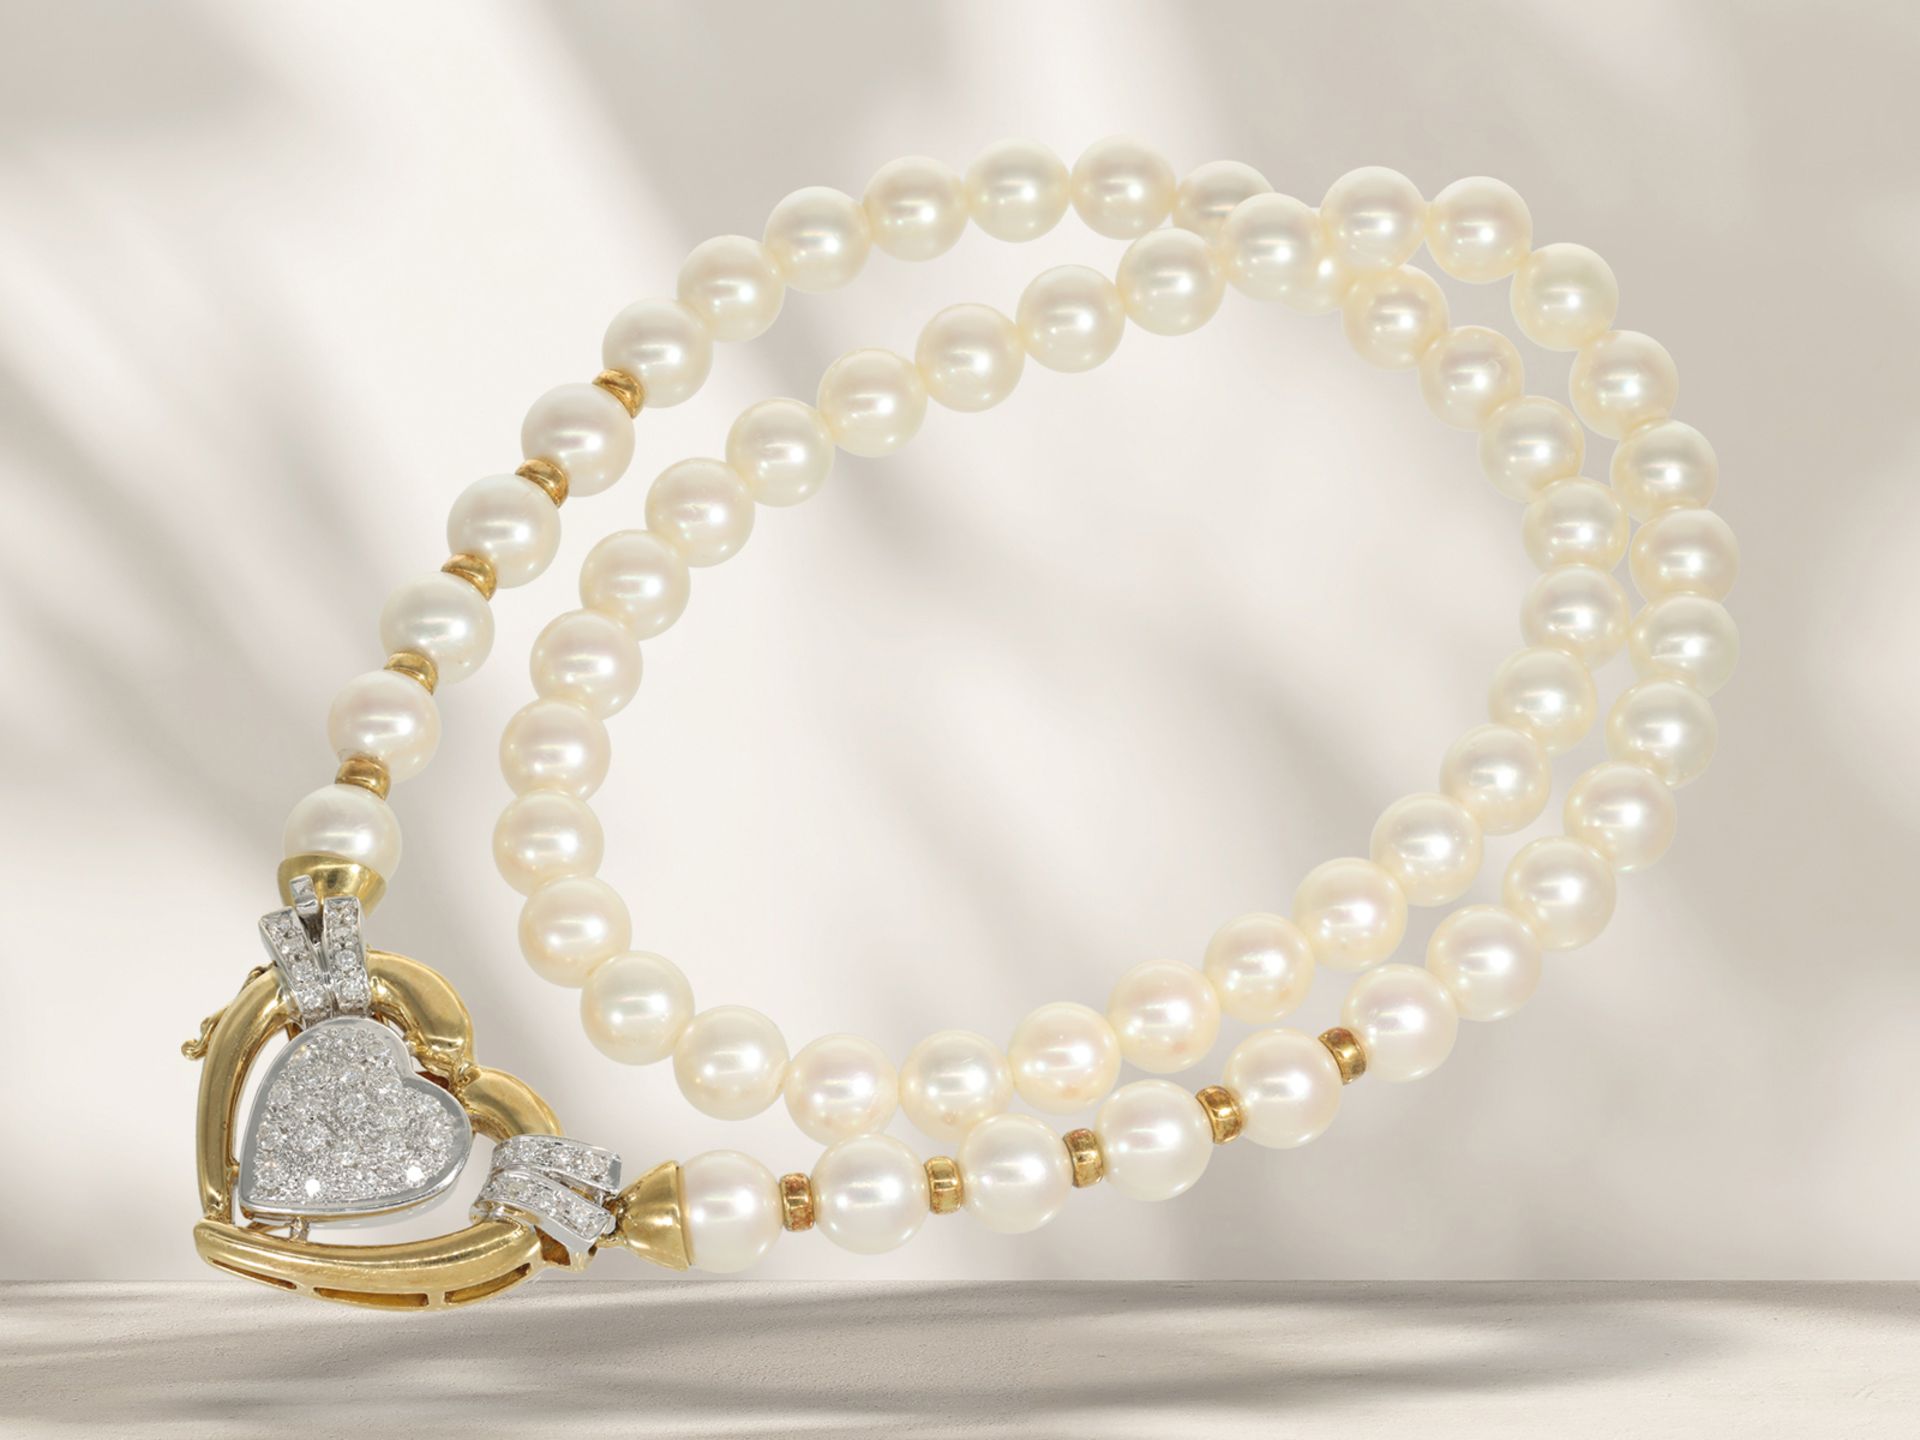 Valuable vintage cultured pearl necklace by Wempe with decorative 18K diamond clasp in heart shape - Image 2 of 3